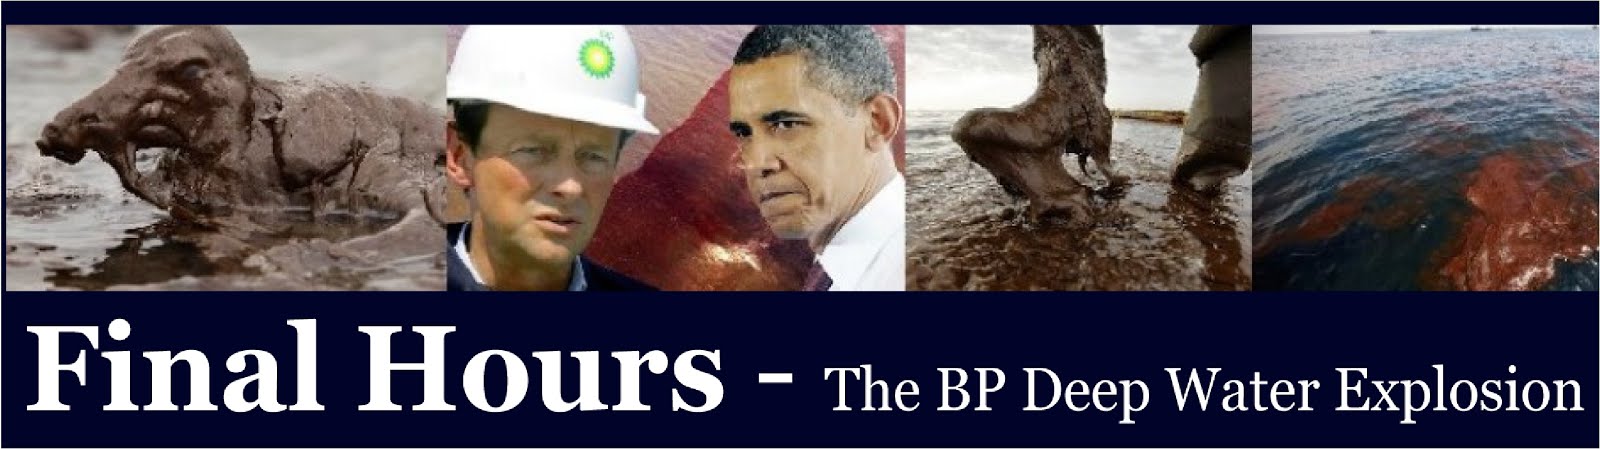 Final Hours - The BP Deepwater Explosion and the Abuse of Water Resources in North America